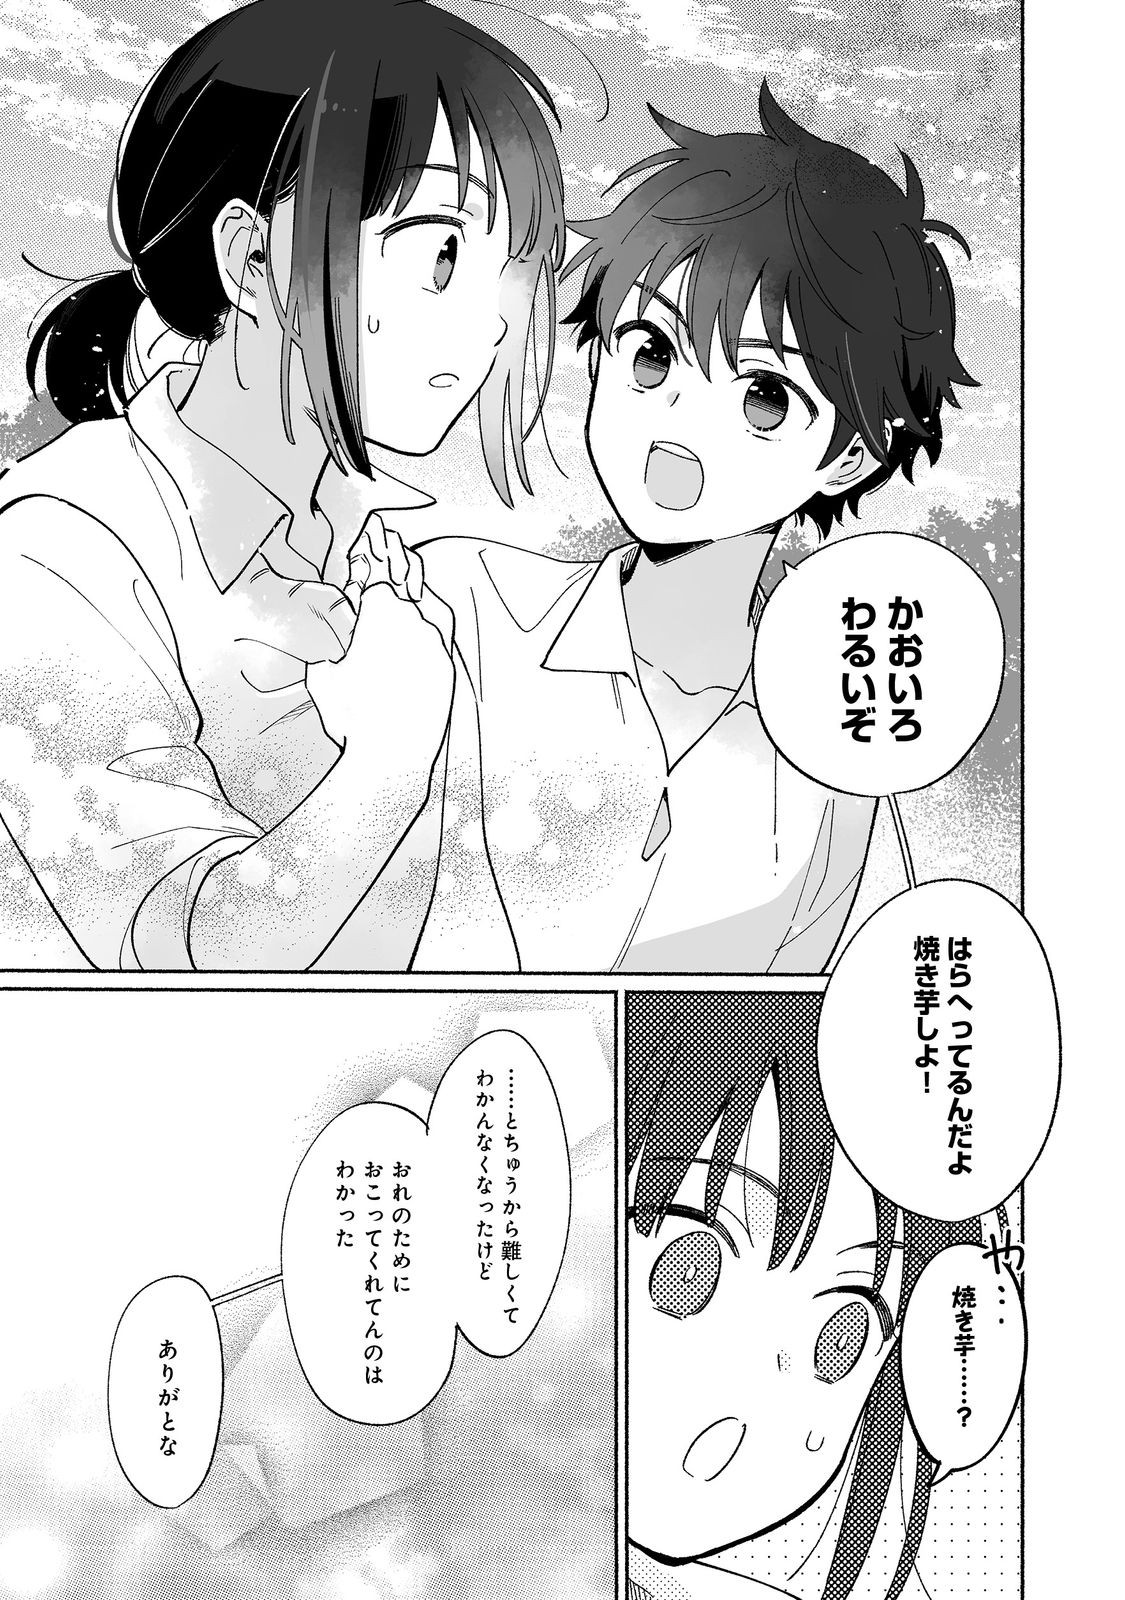 I’m the White Pig Nobleman 第18.2話 - Page 2